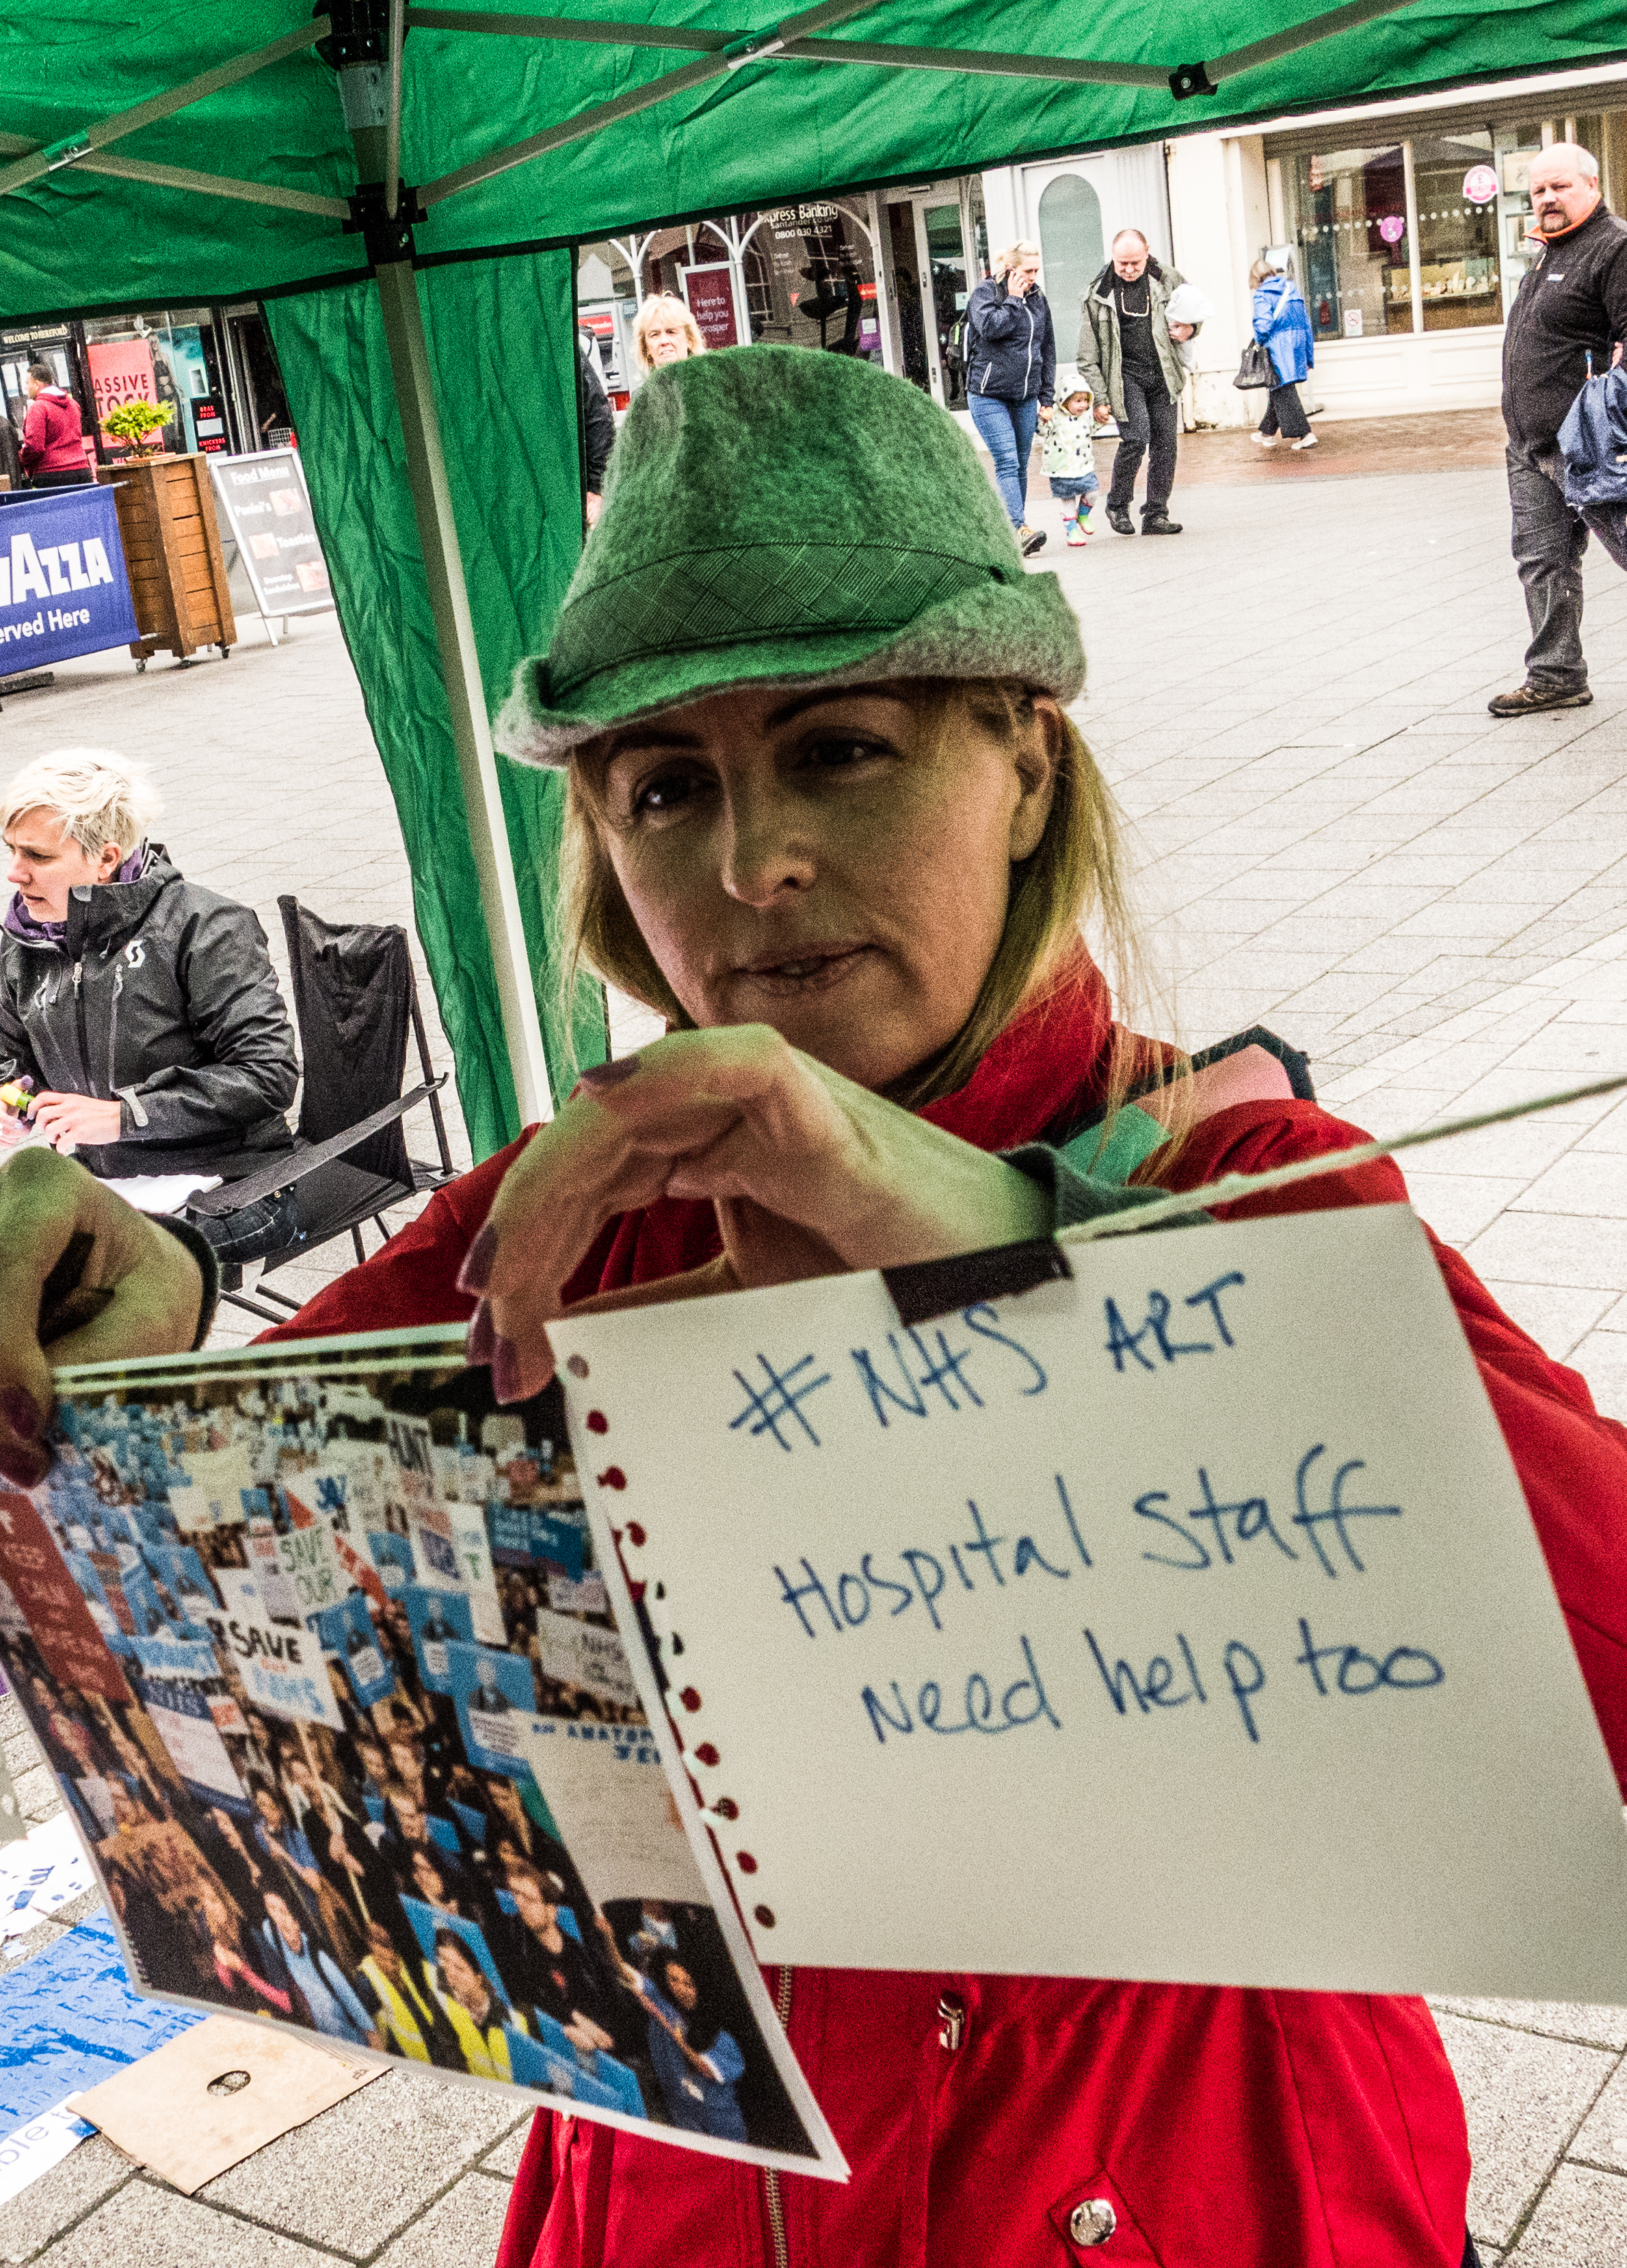 Artists show support for NHS at event in Hereford